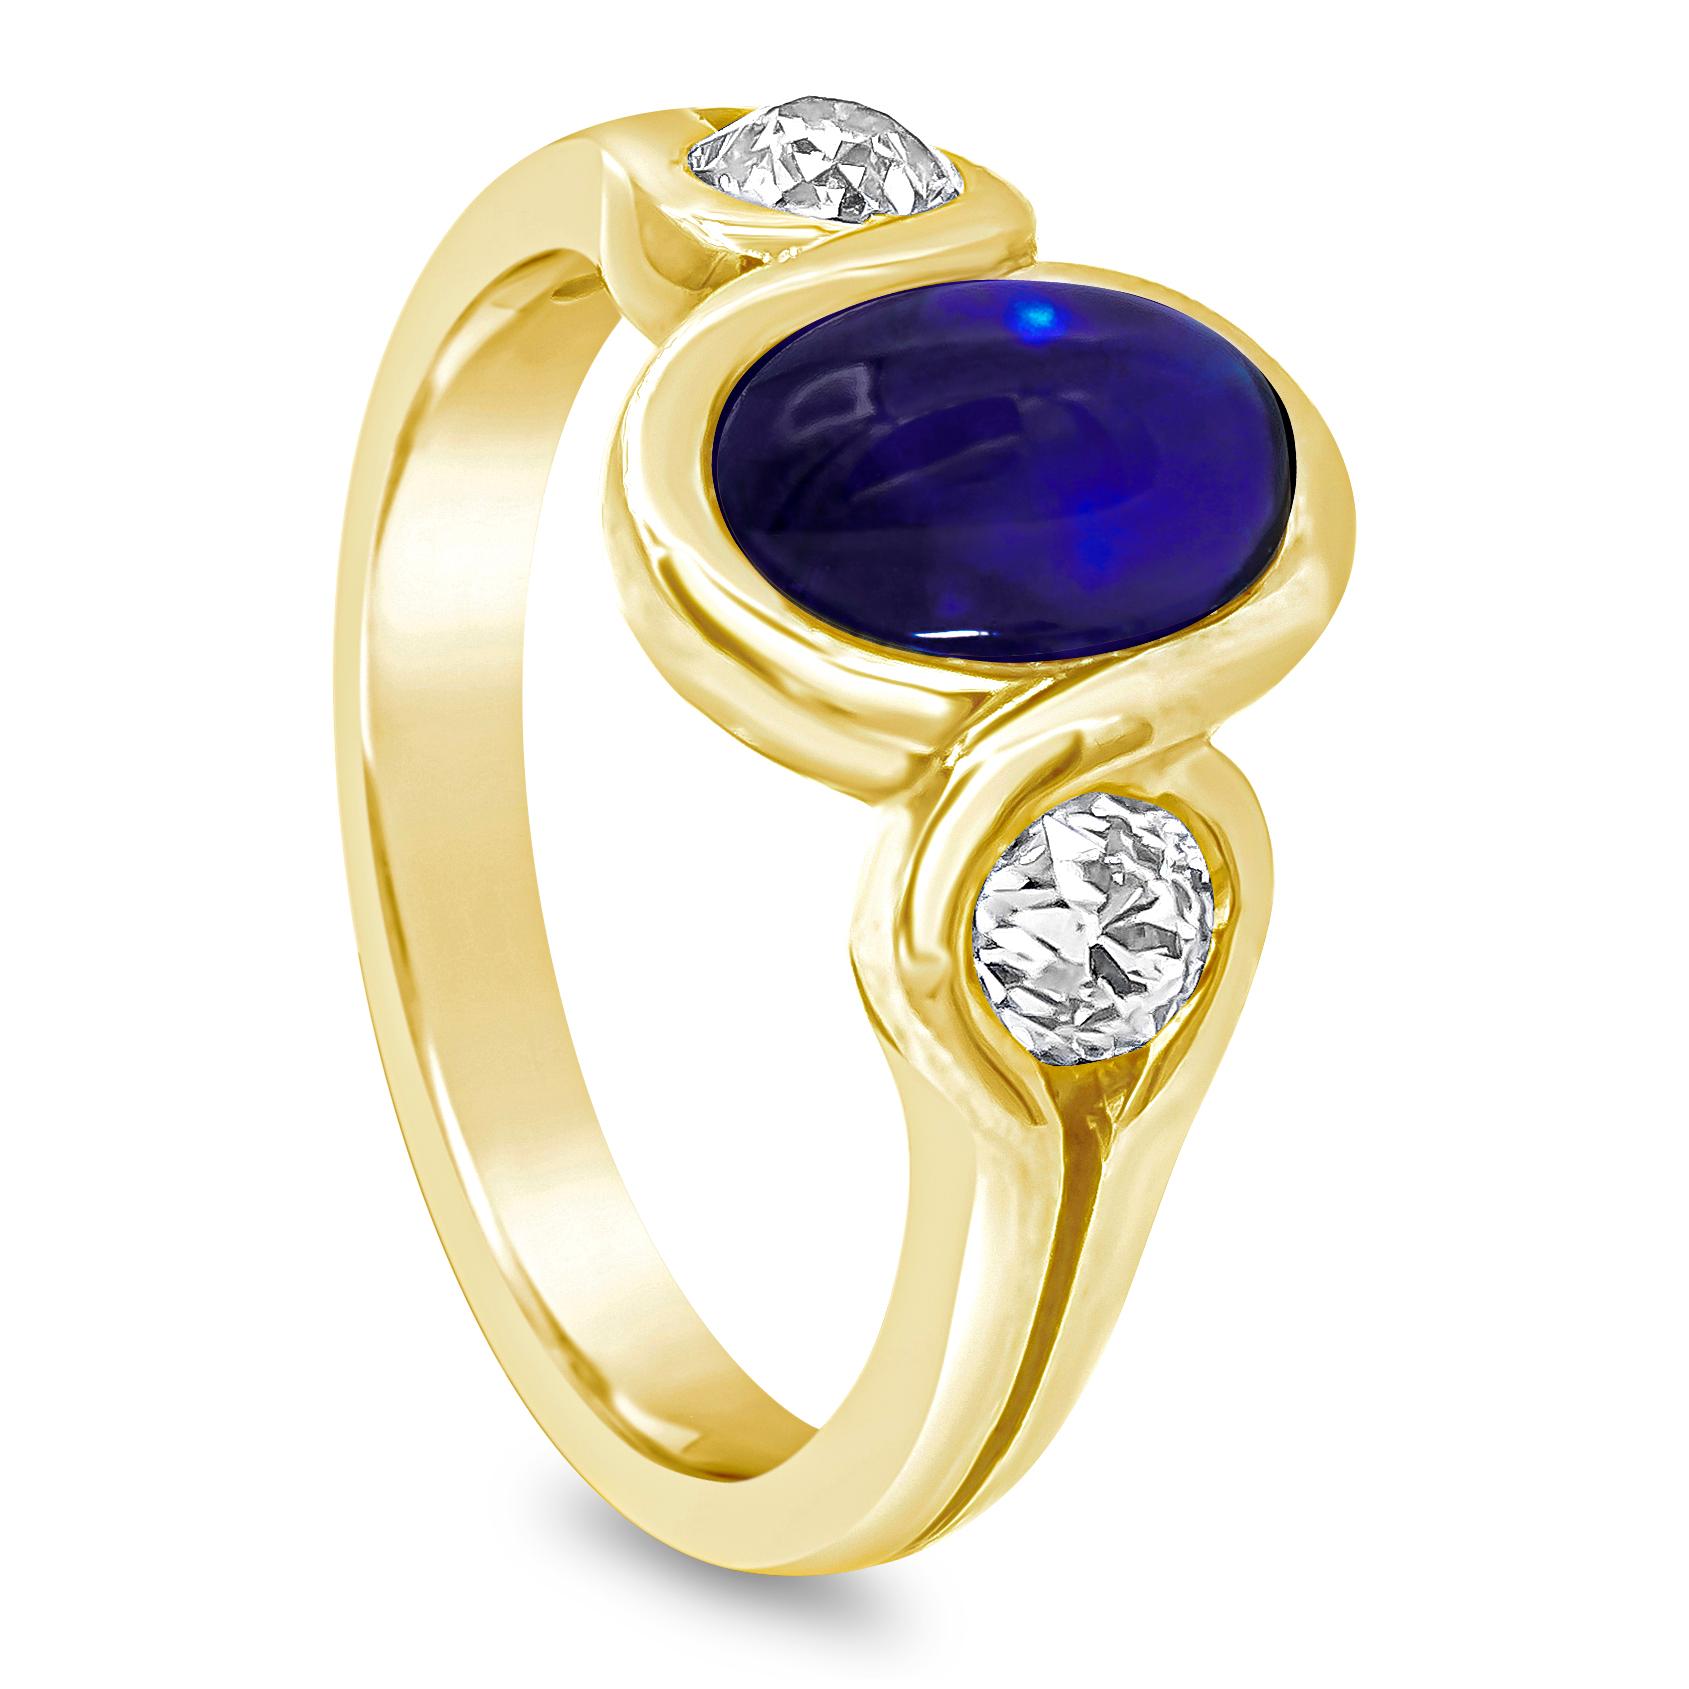 A appealing gemstone fashion ring showcasing a 2.50 carat oval shape blue sapphire cabochon in the center and an old european cut diamond on each side weighing 0.80 carats total. Set in an integrated bezel, Made in 18K Yellow Gold, Size 7.5